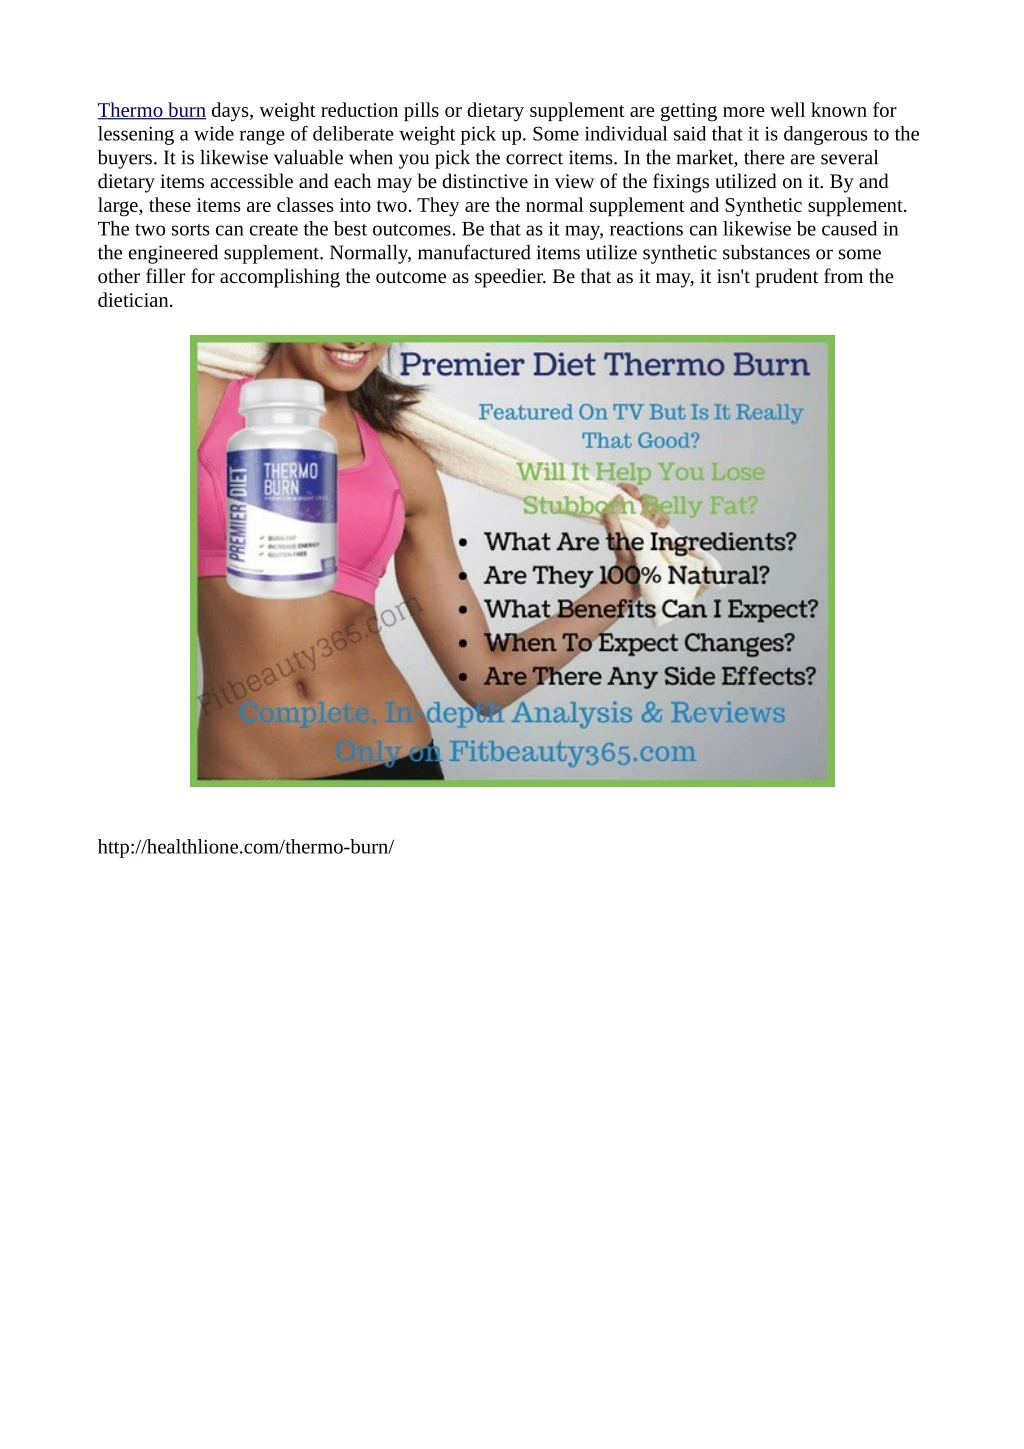 thermo burn days weight reduction pills